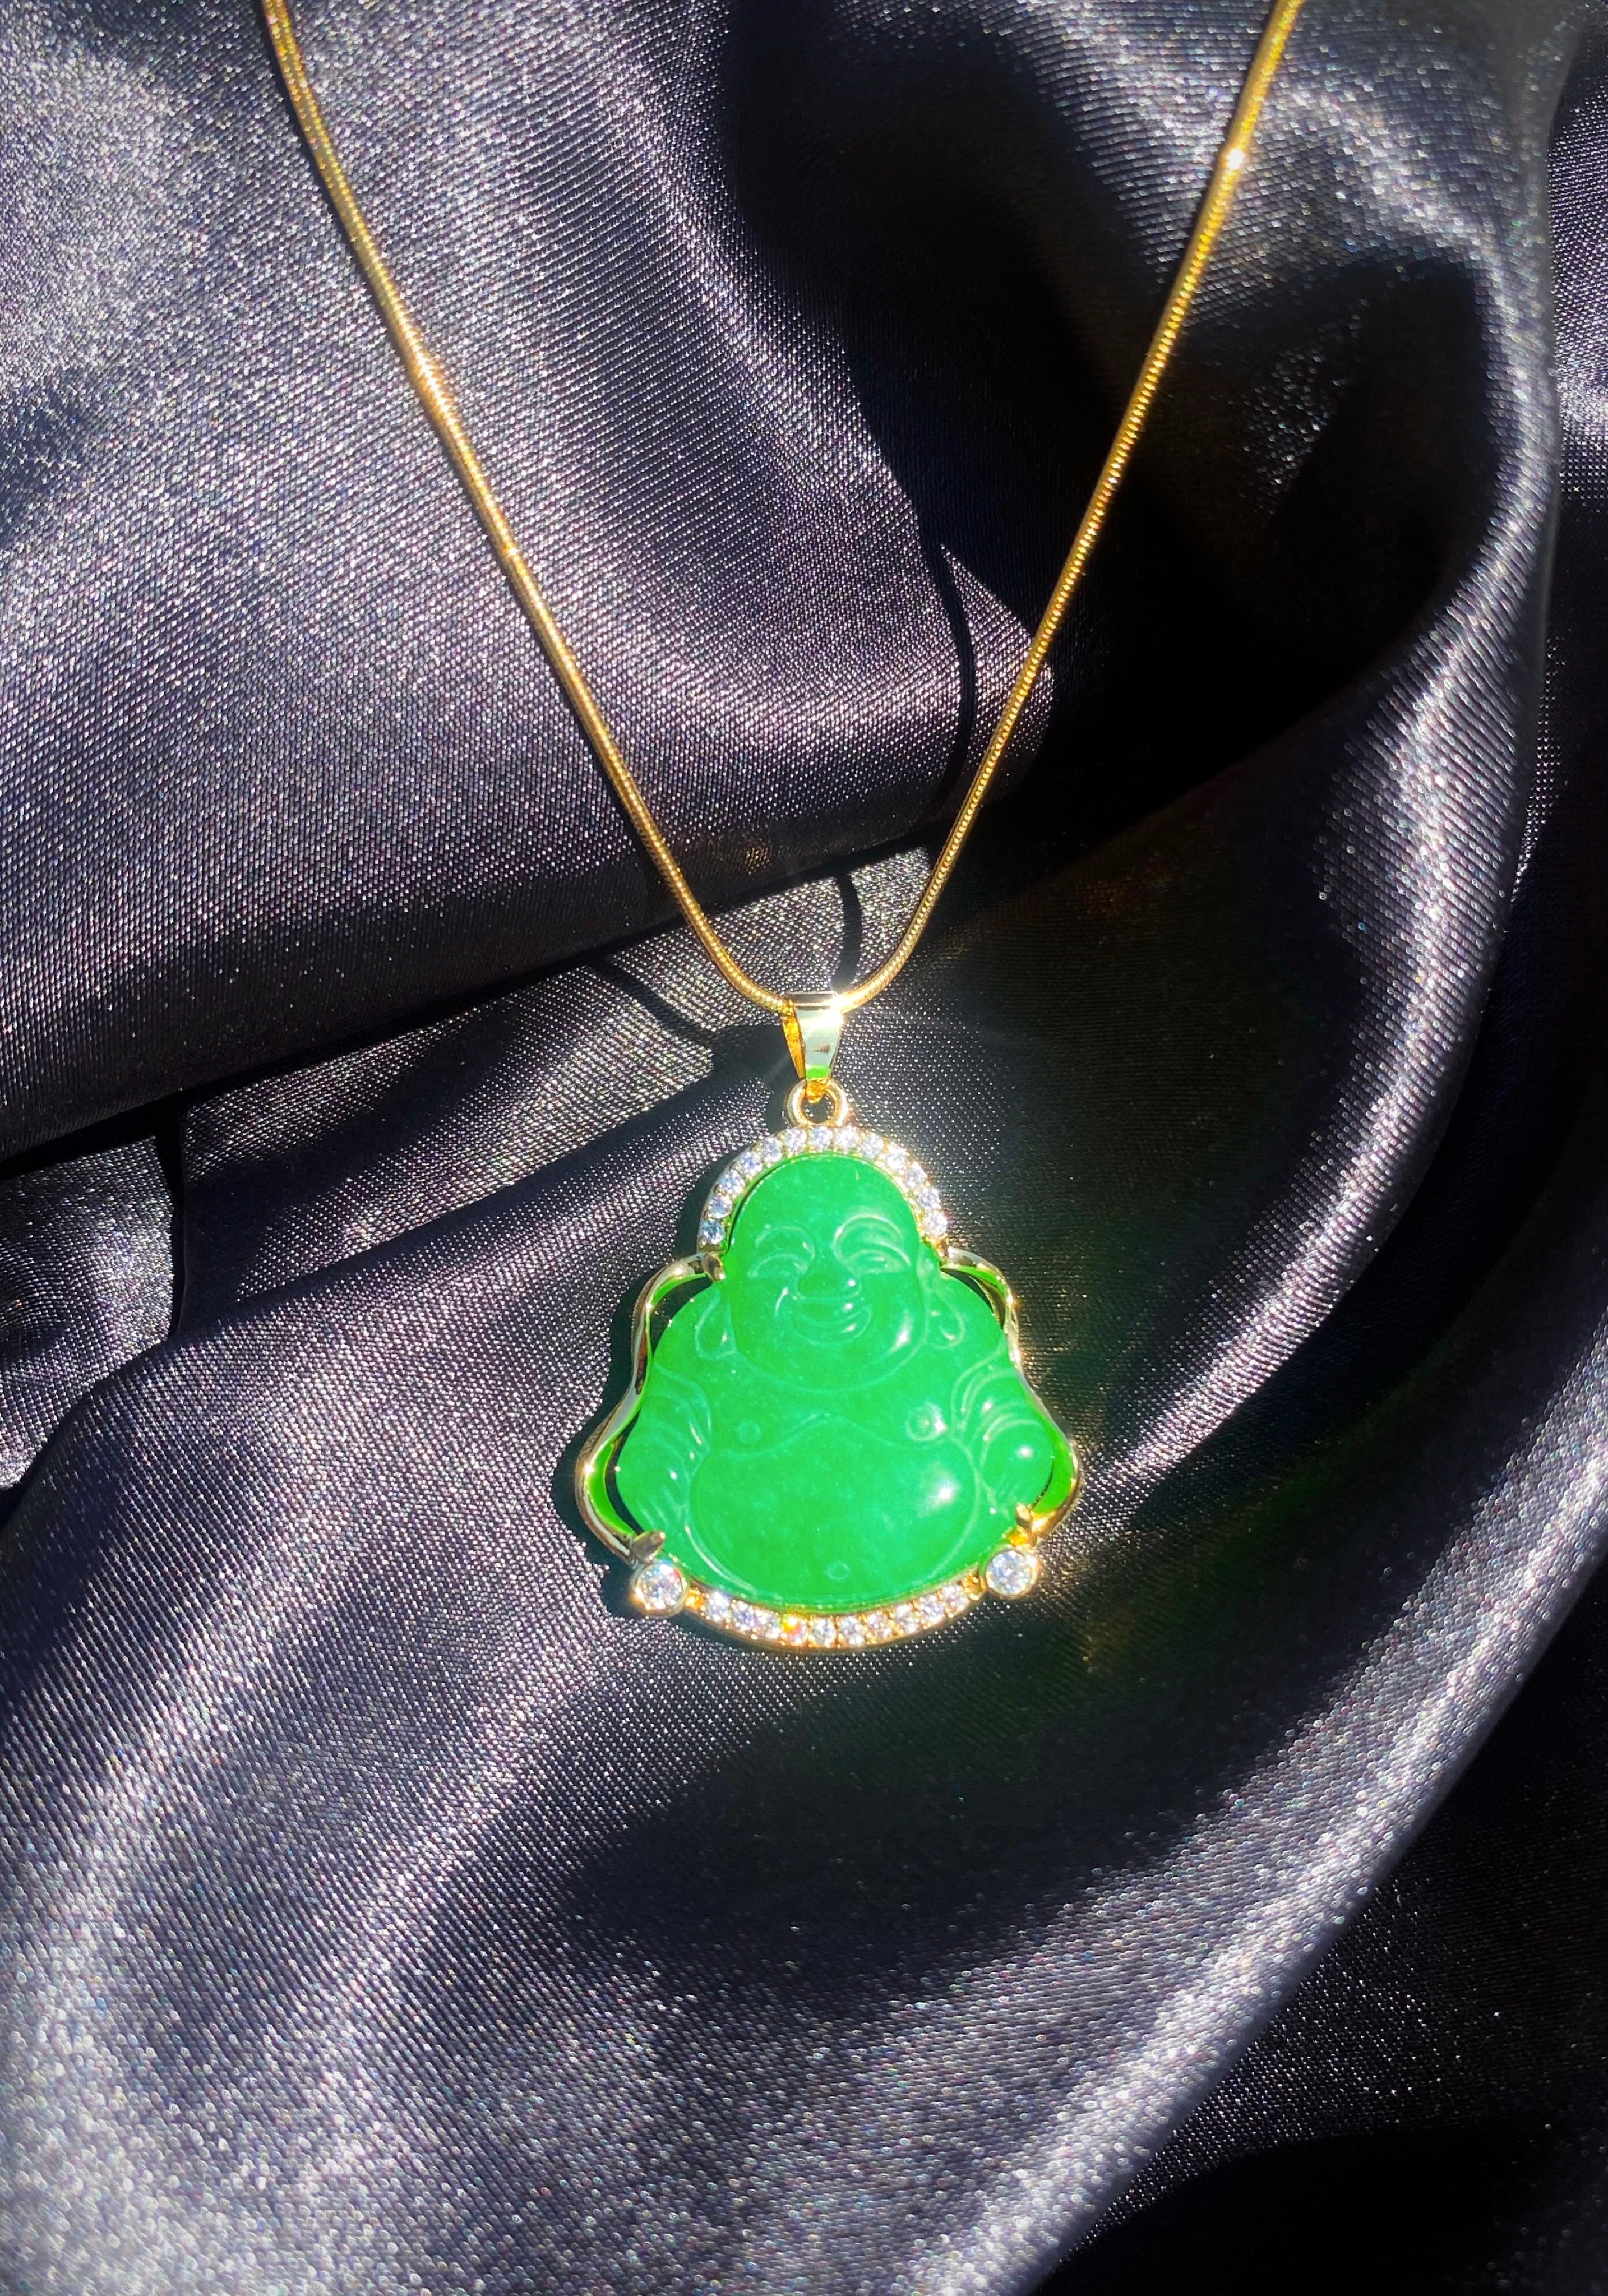 14k Gold over Good luck Dark Green Jade Laughing Buddha Rope Chain Necklace  | eBay